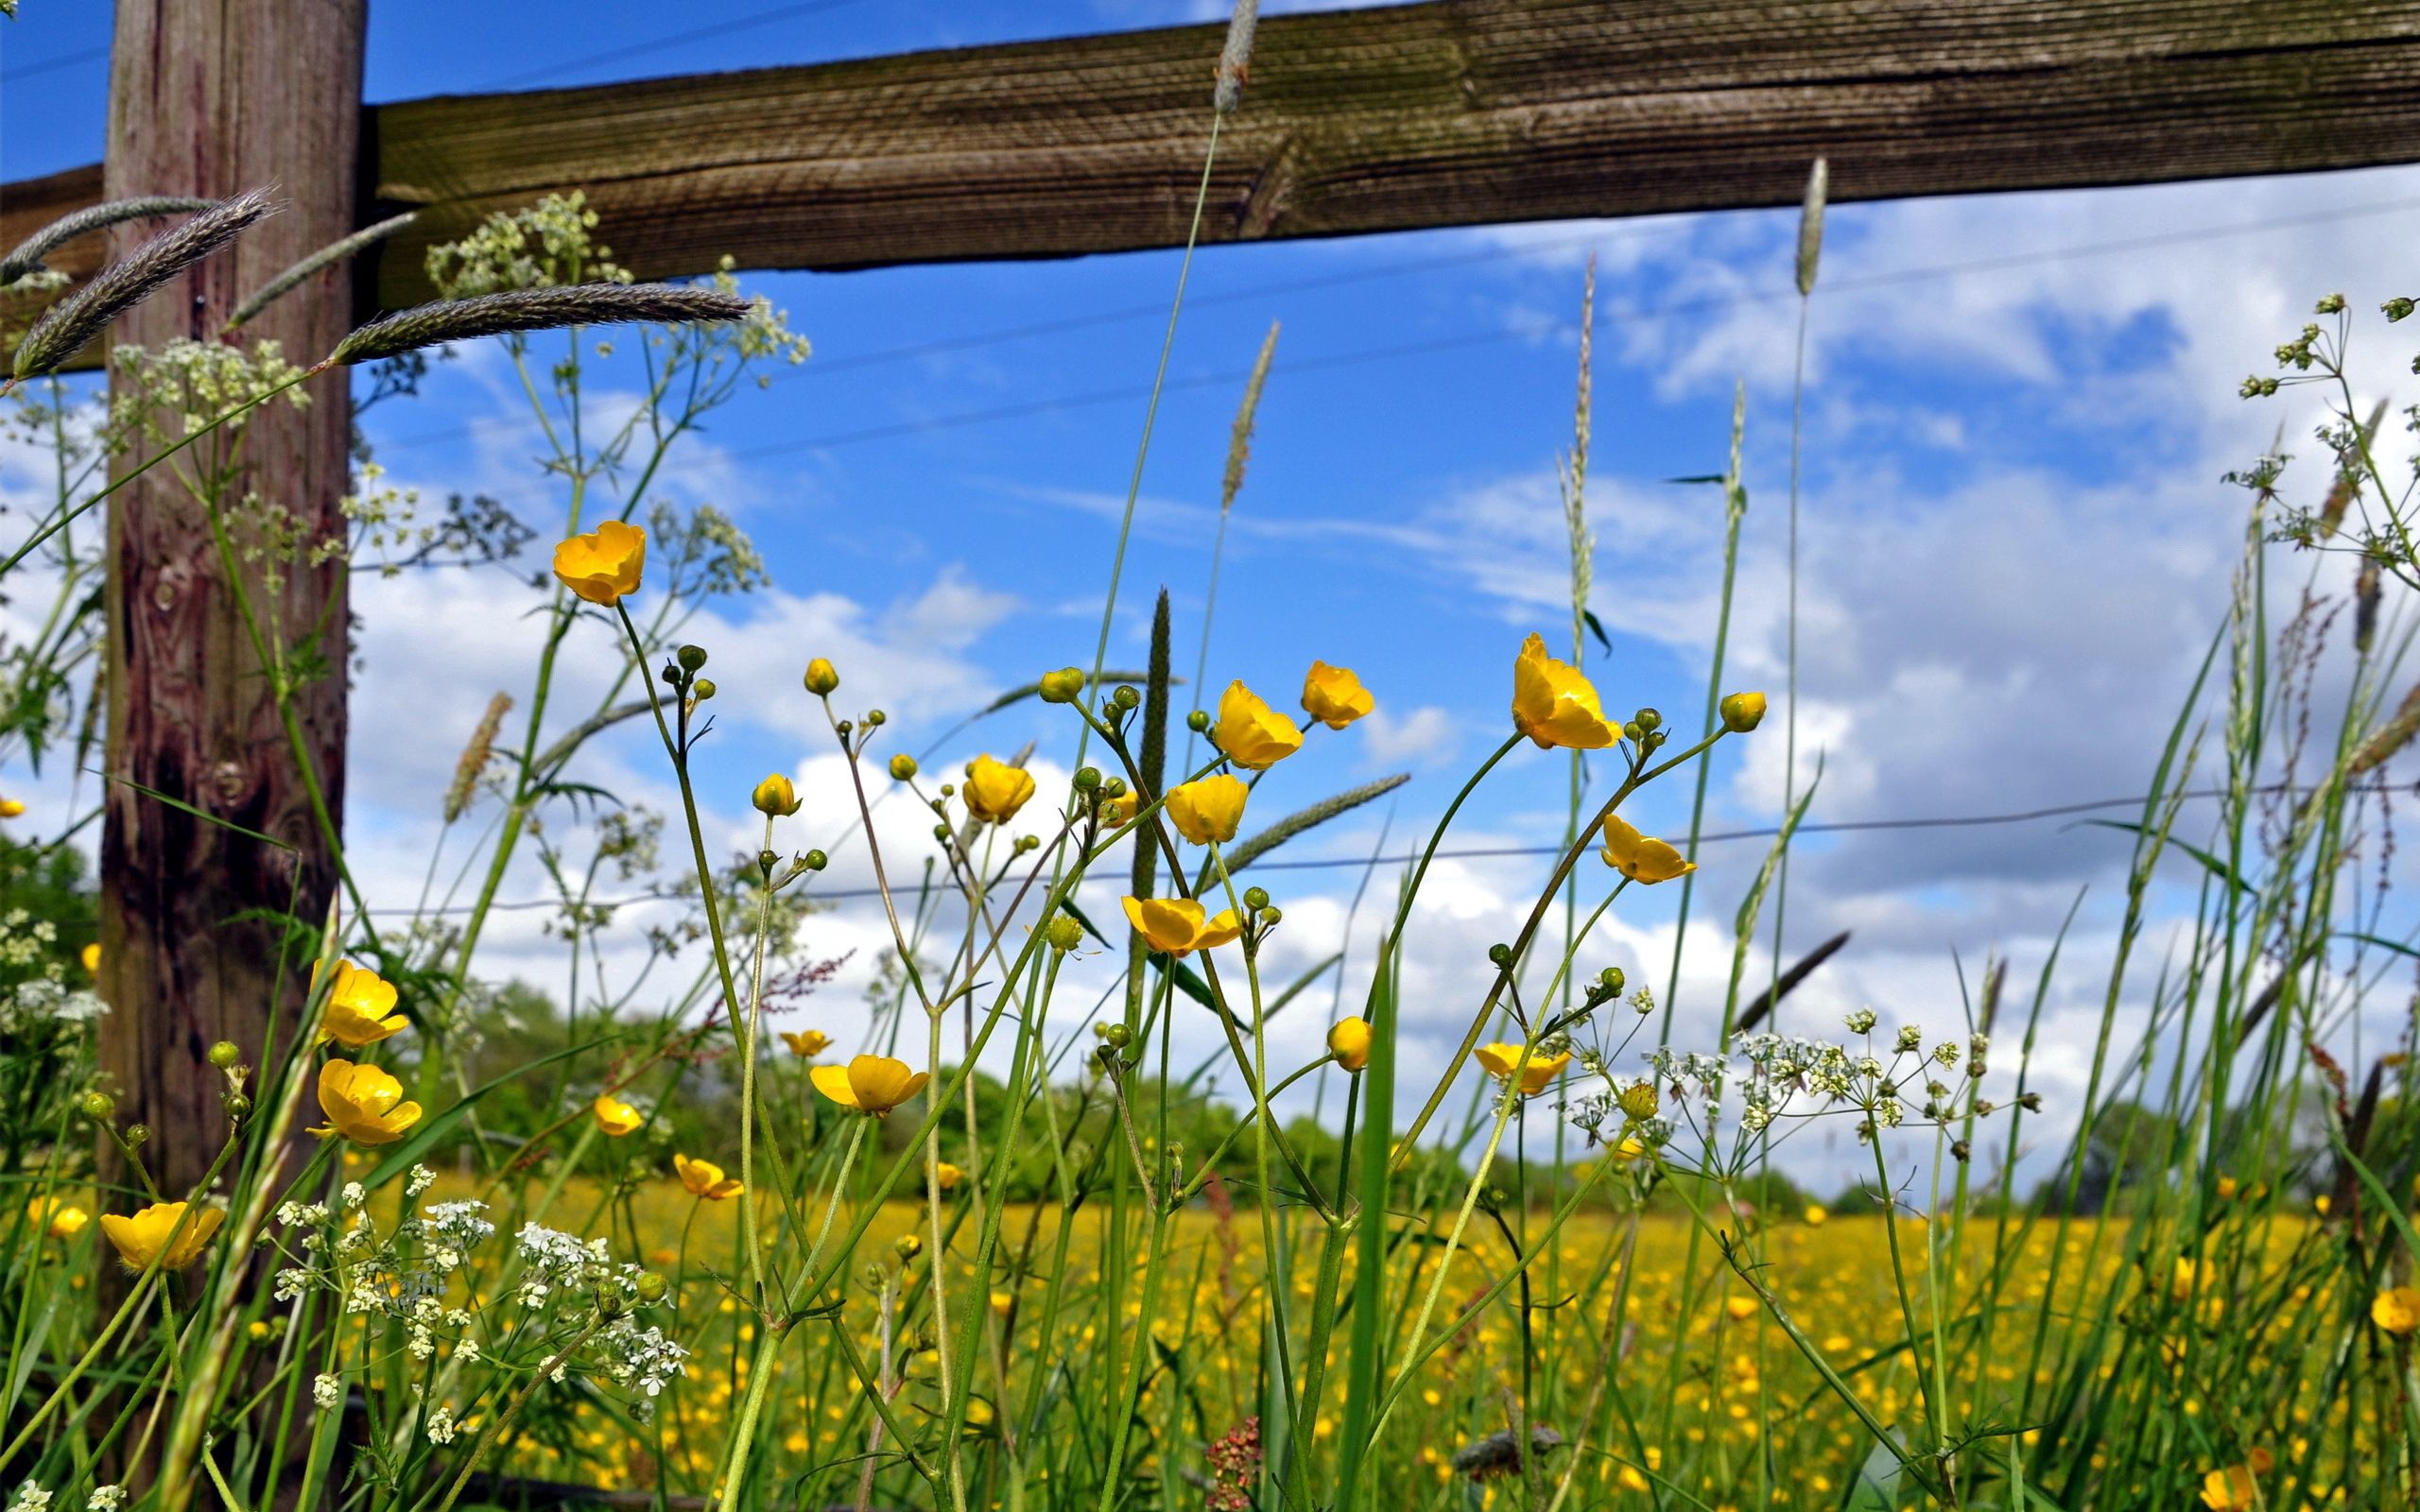 enclosure, nature, flowers, yellow, field, fence, fencing, planks, board, sunny